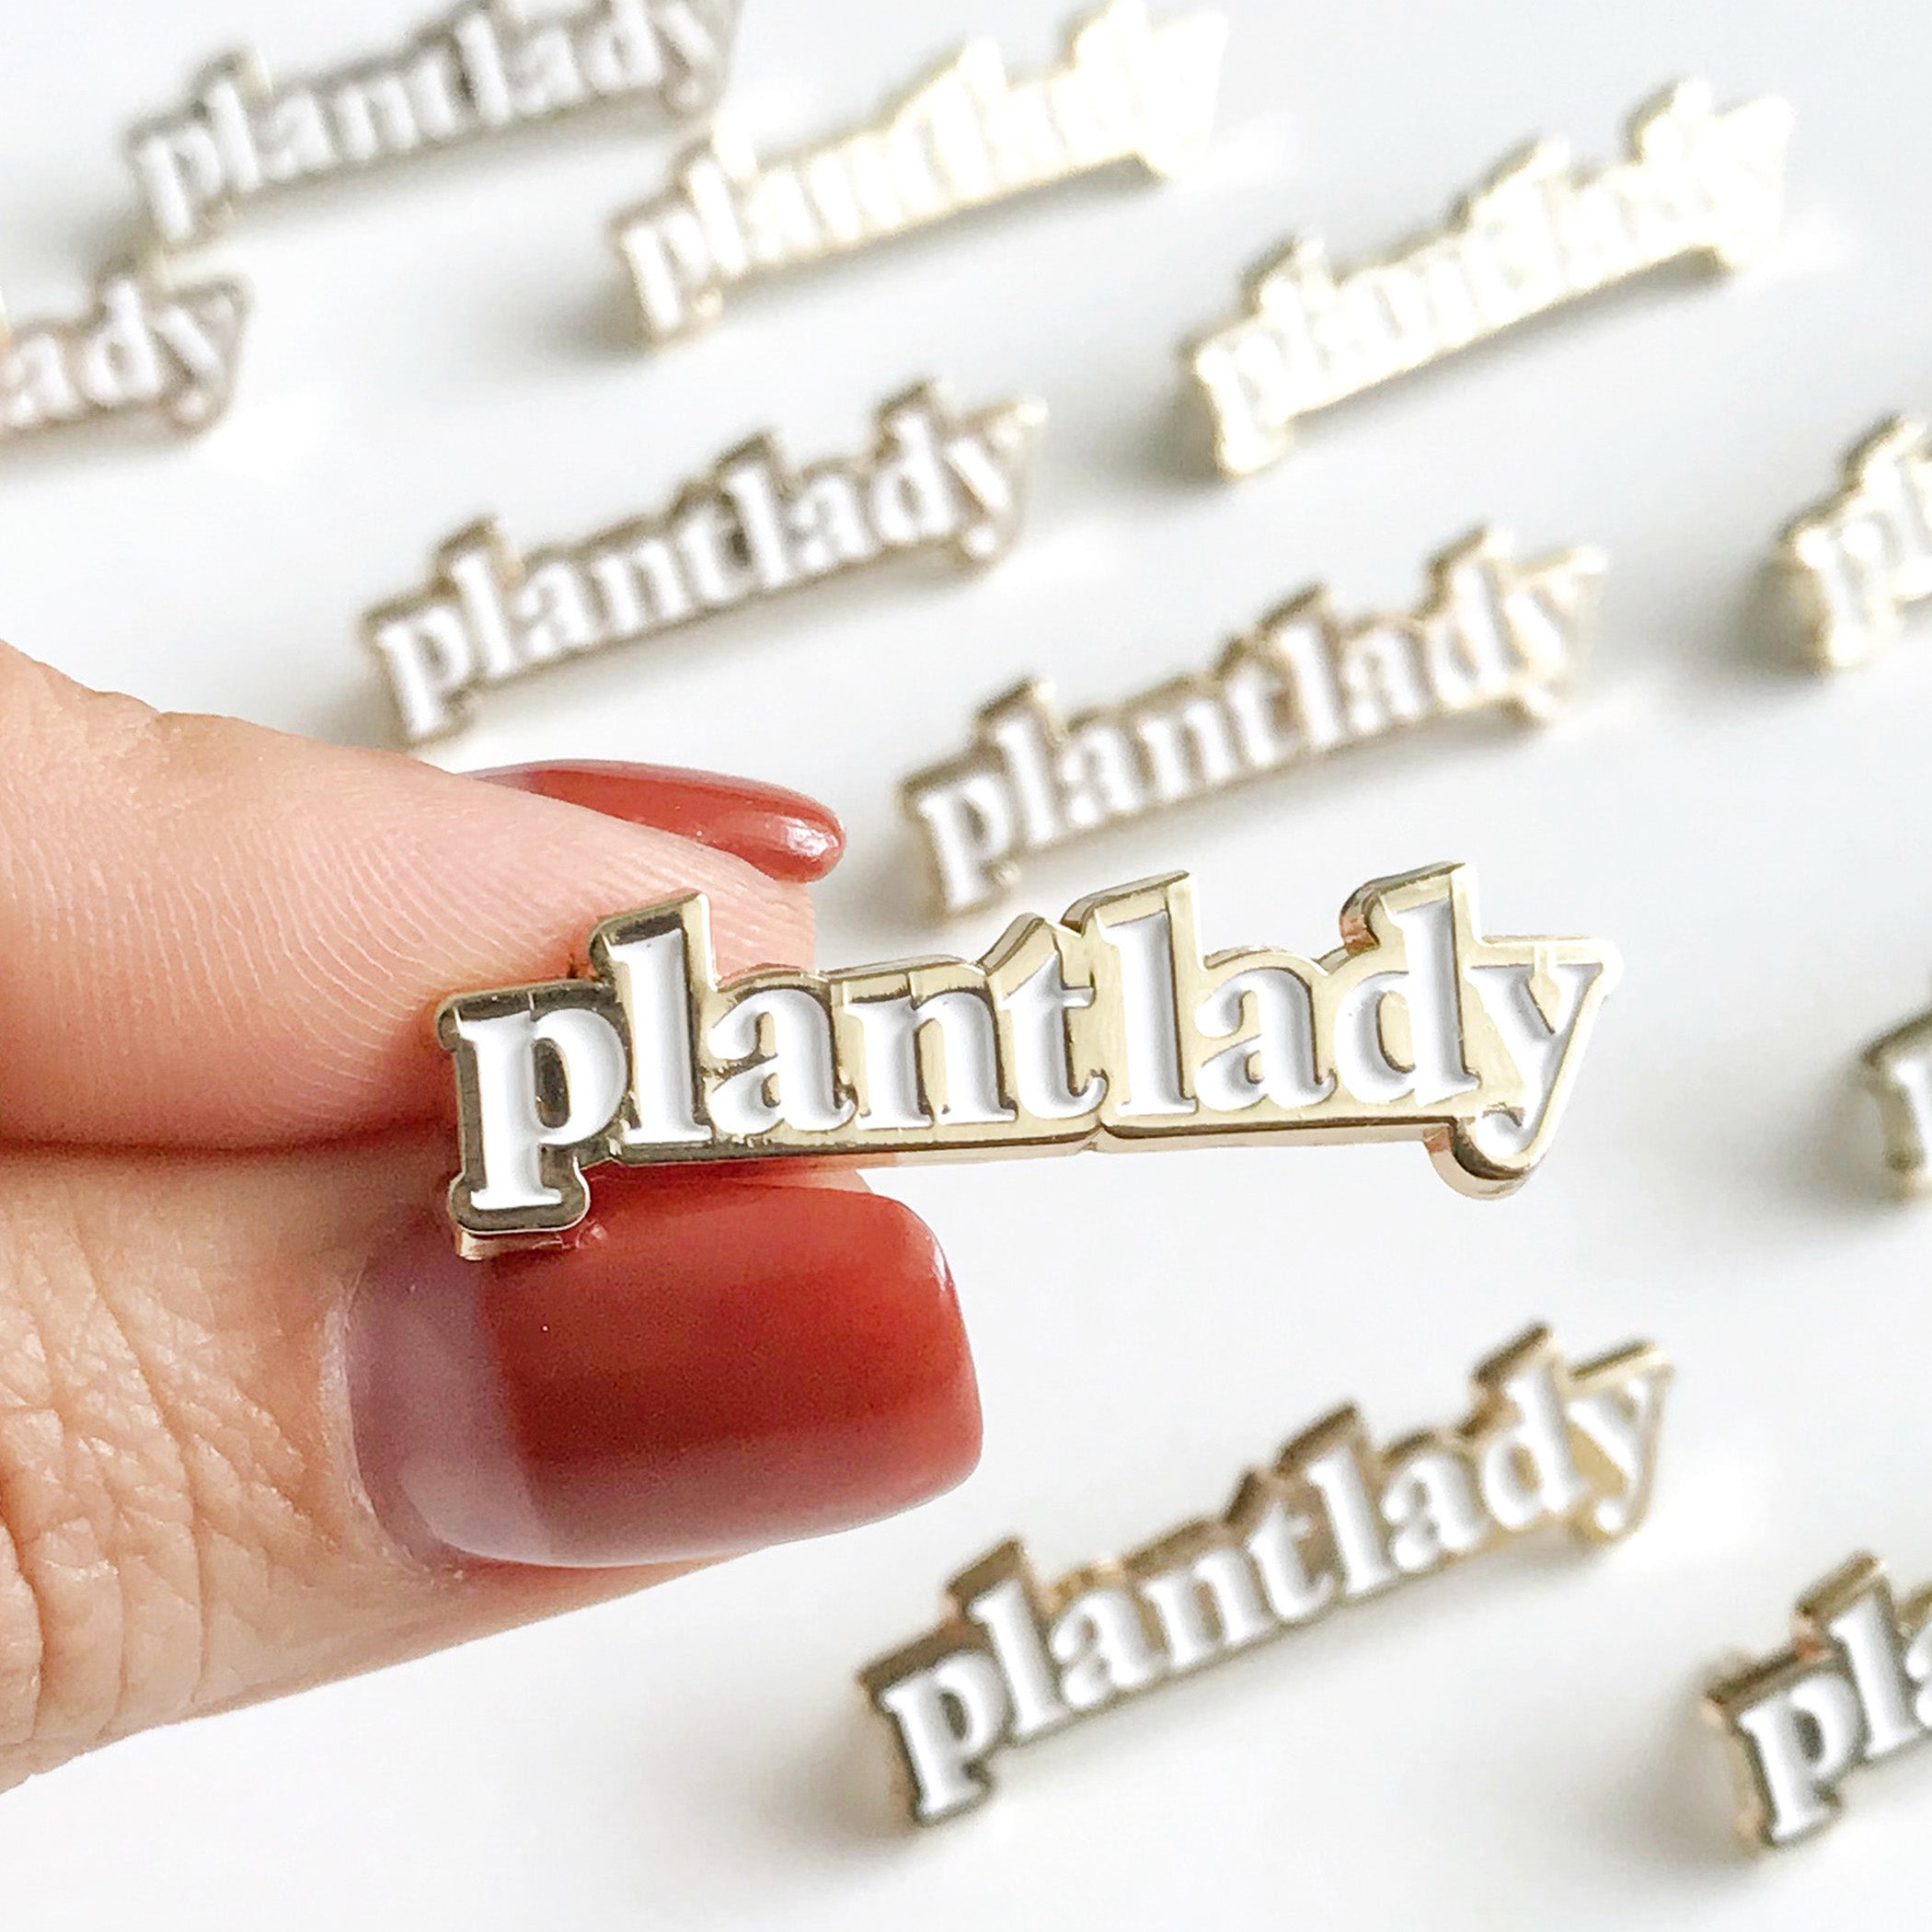 Crazy Plant Lady Pin, Plant Pins Enamel, Succulent Brooch, Bag Backpack